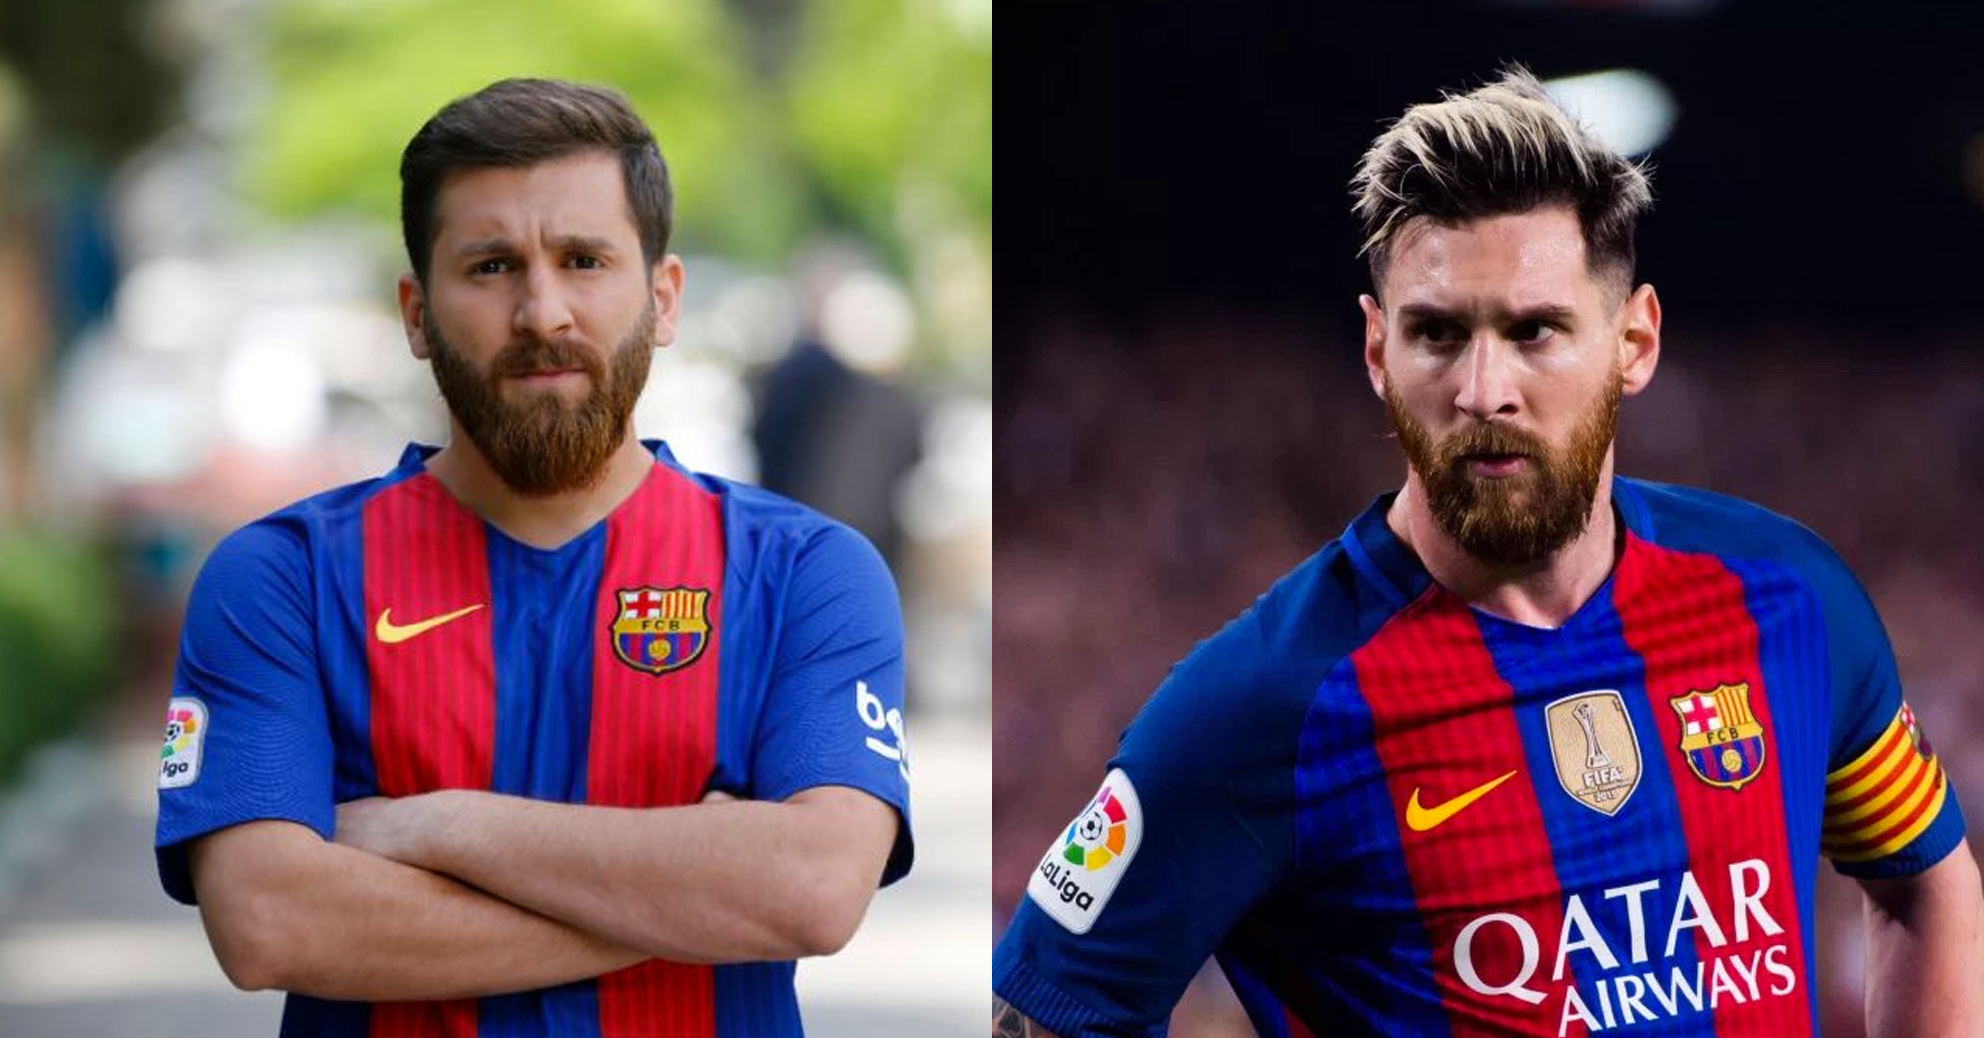 This Iranian Man Looks So Much Like Messi That Police Detained Him For ...